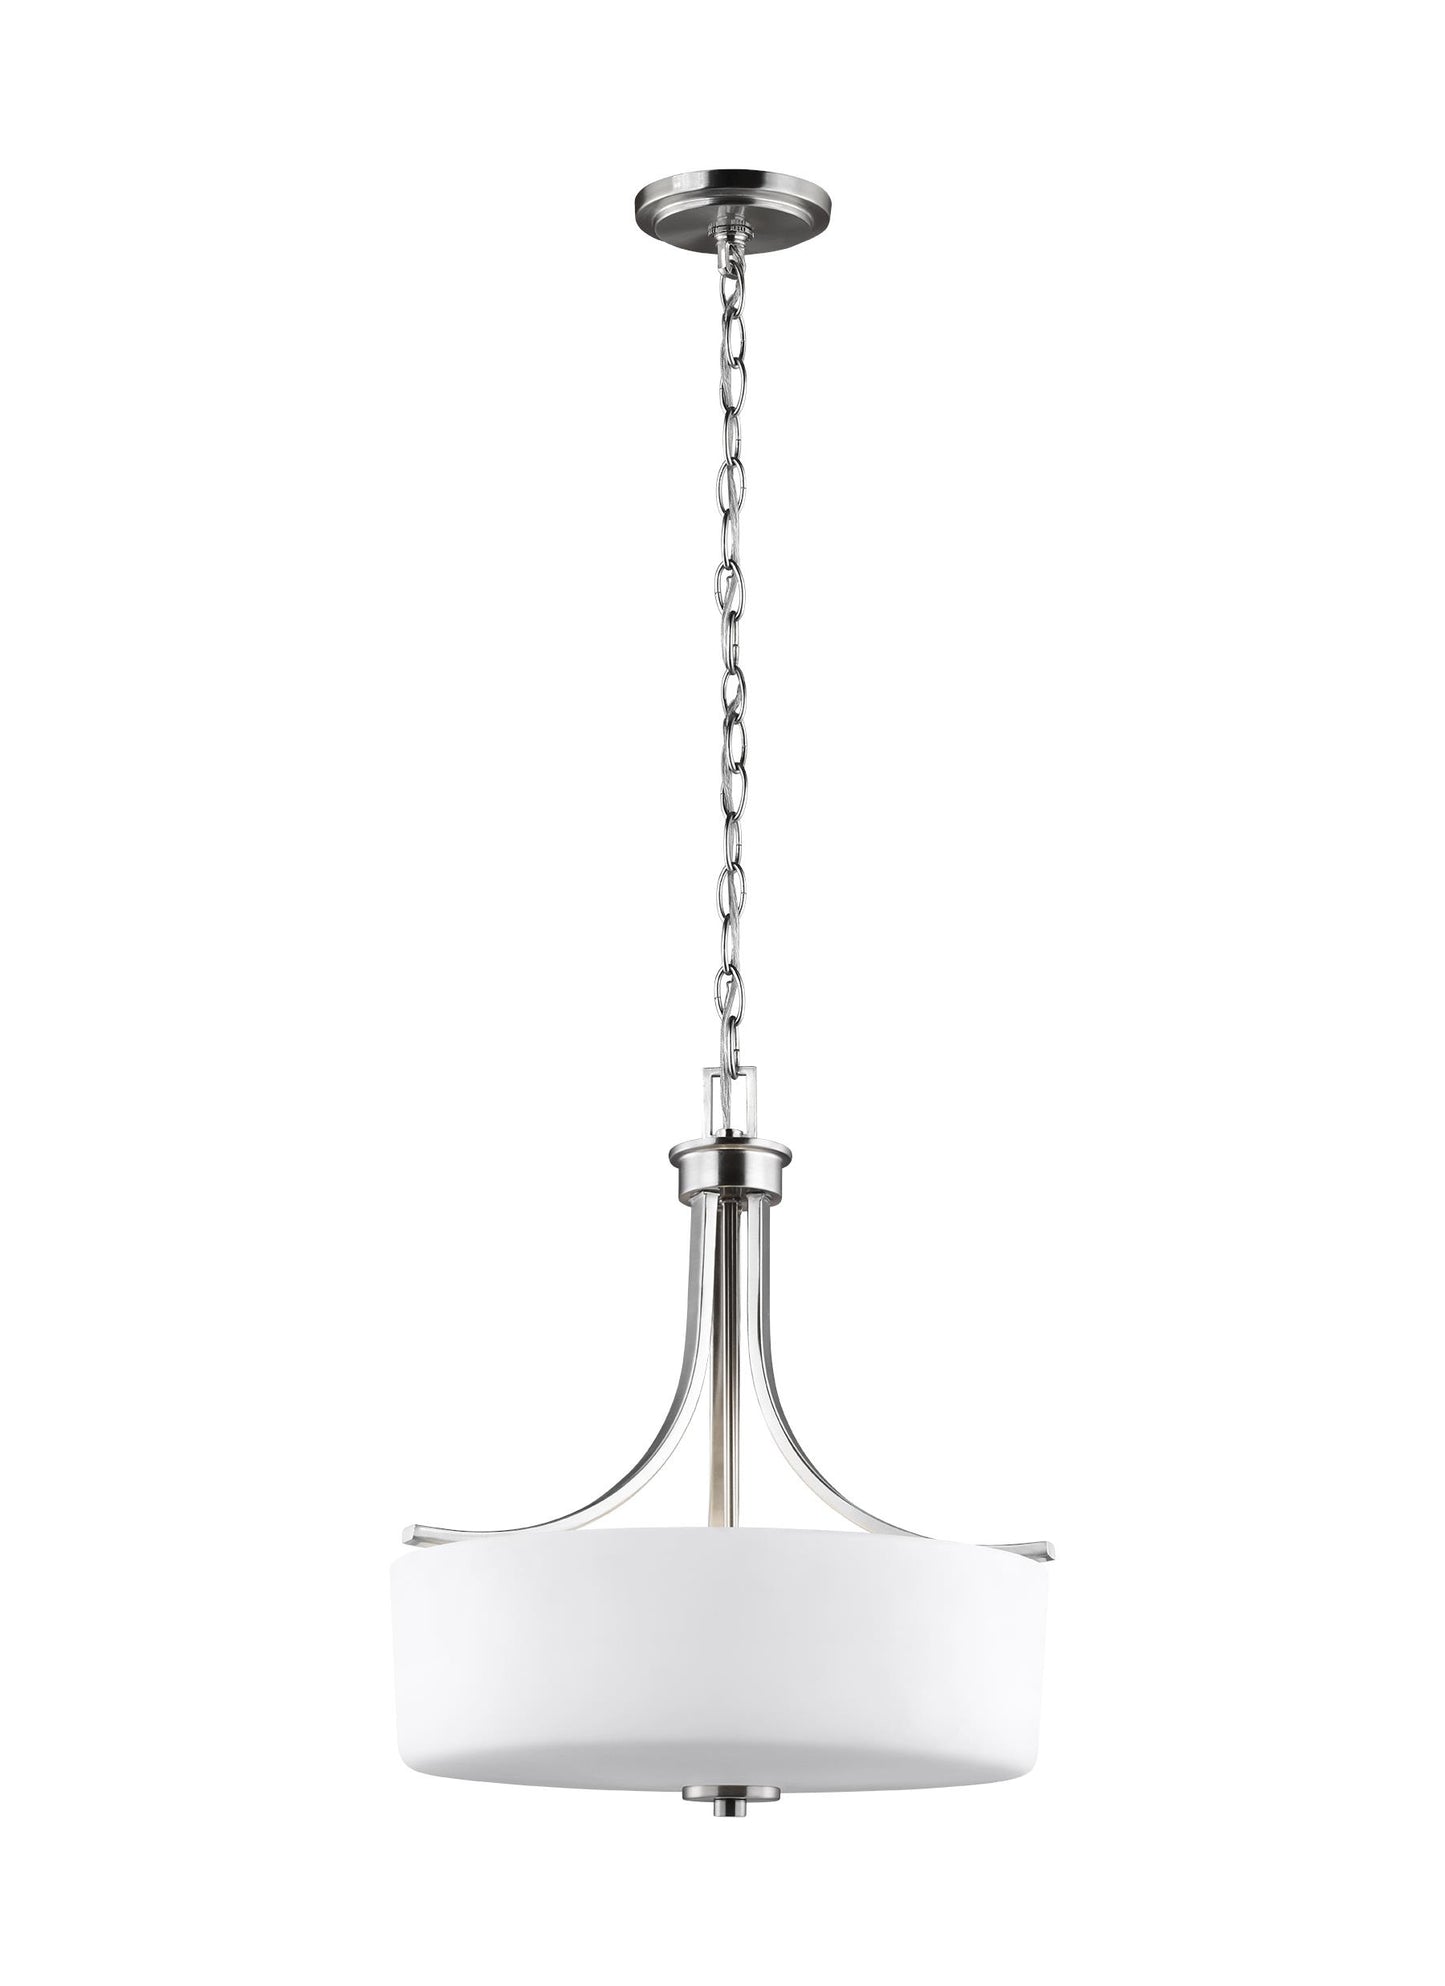 Canfield modern 3-light indoor dimmable ceiling pendant hanging chandelier pendant light in brushed nickel silver finish w...